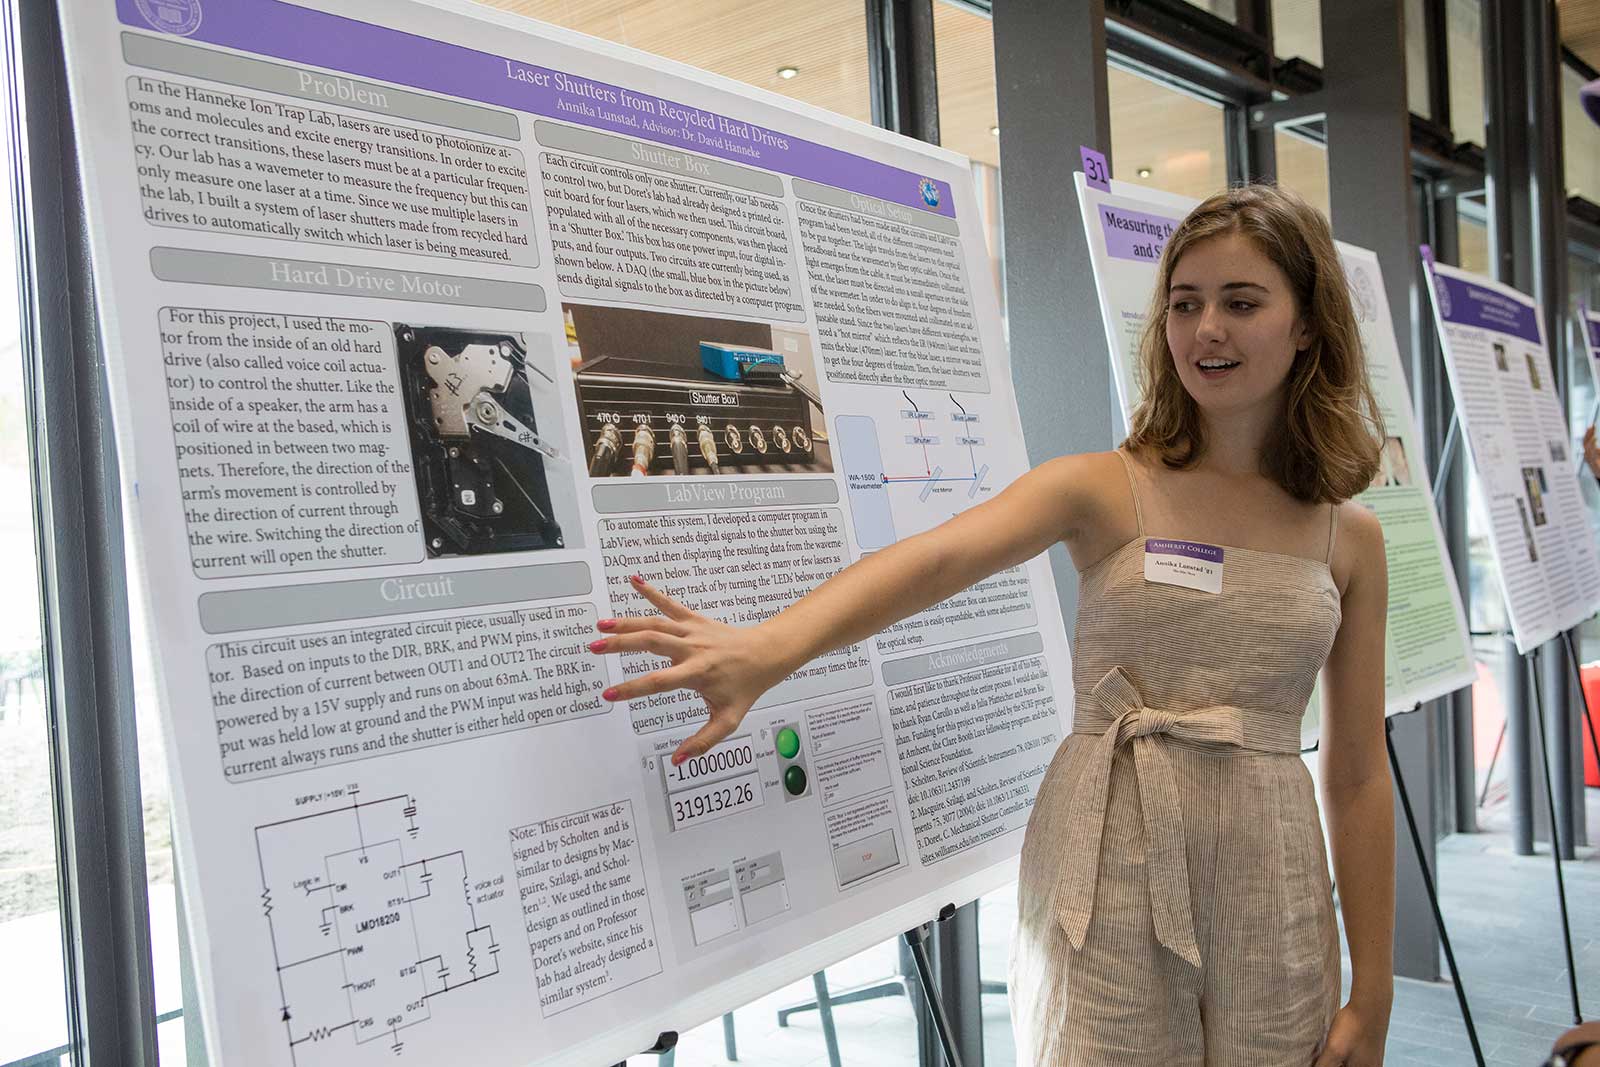 Annika Lunstad '21 at the Summer Research Poster Session